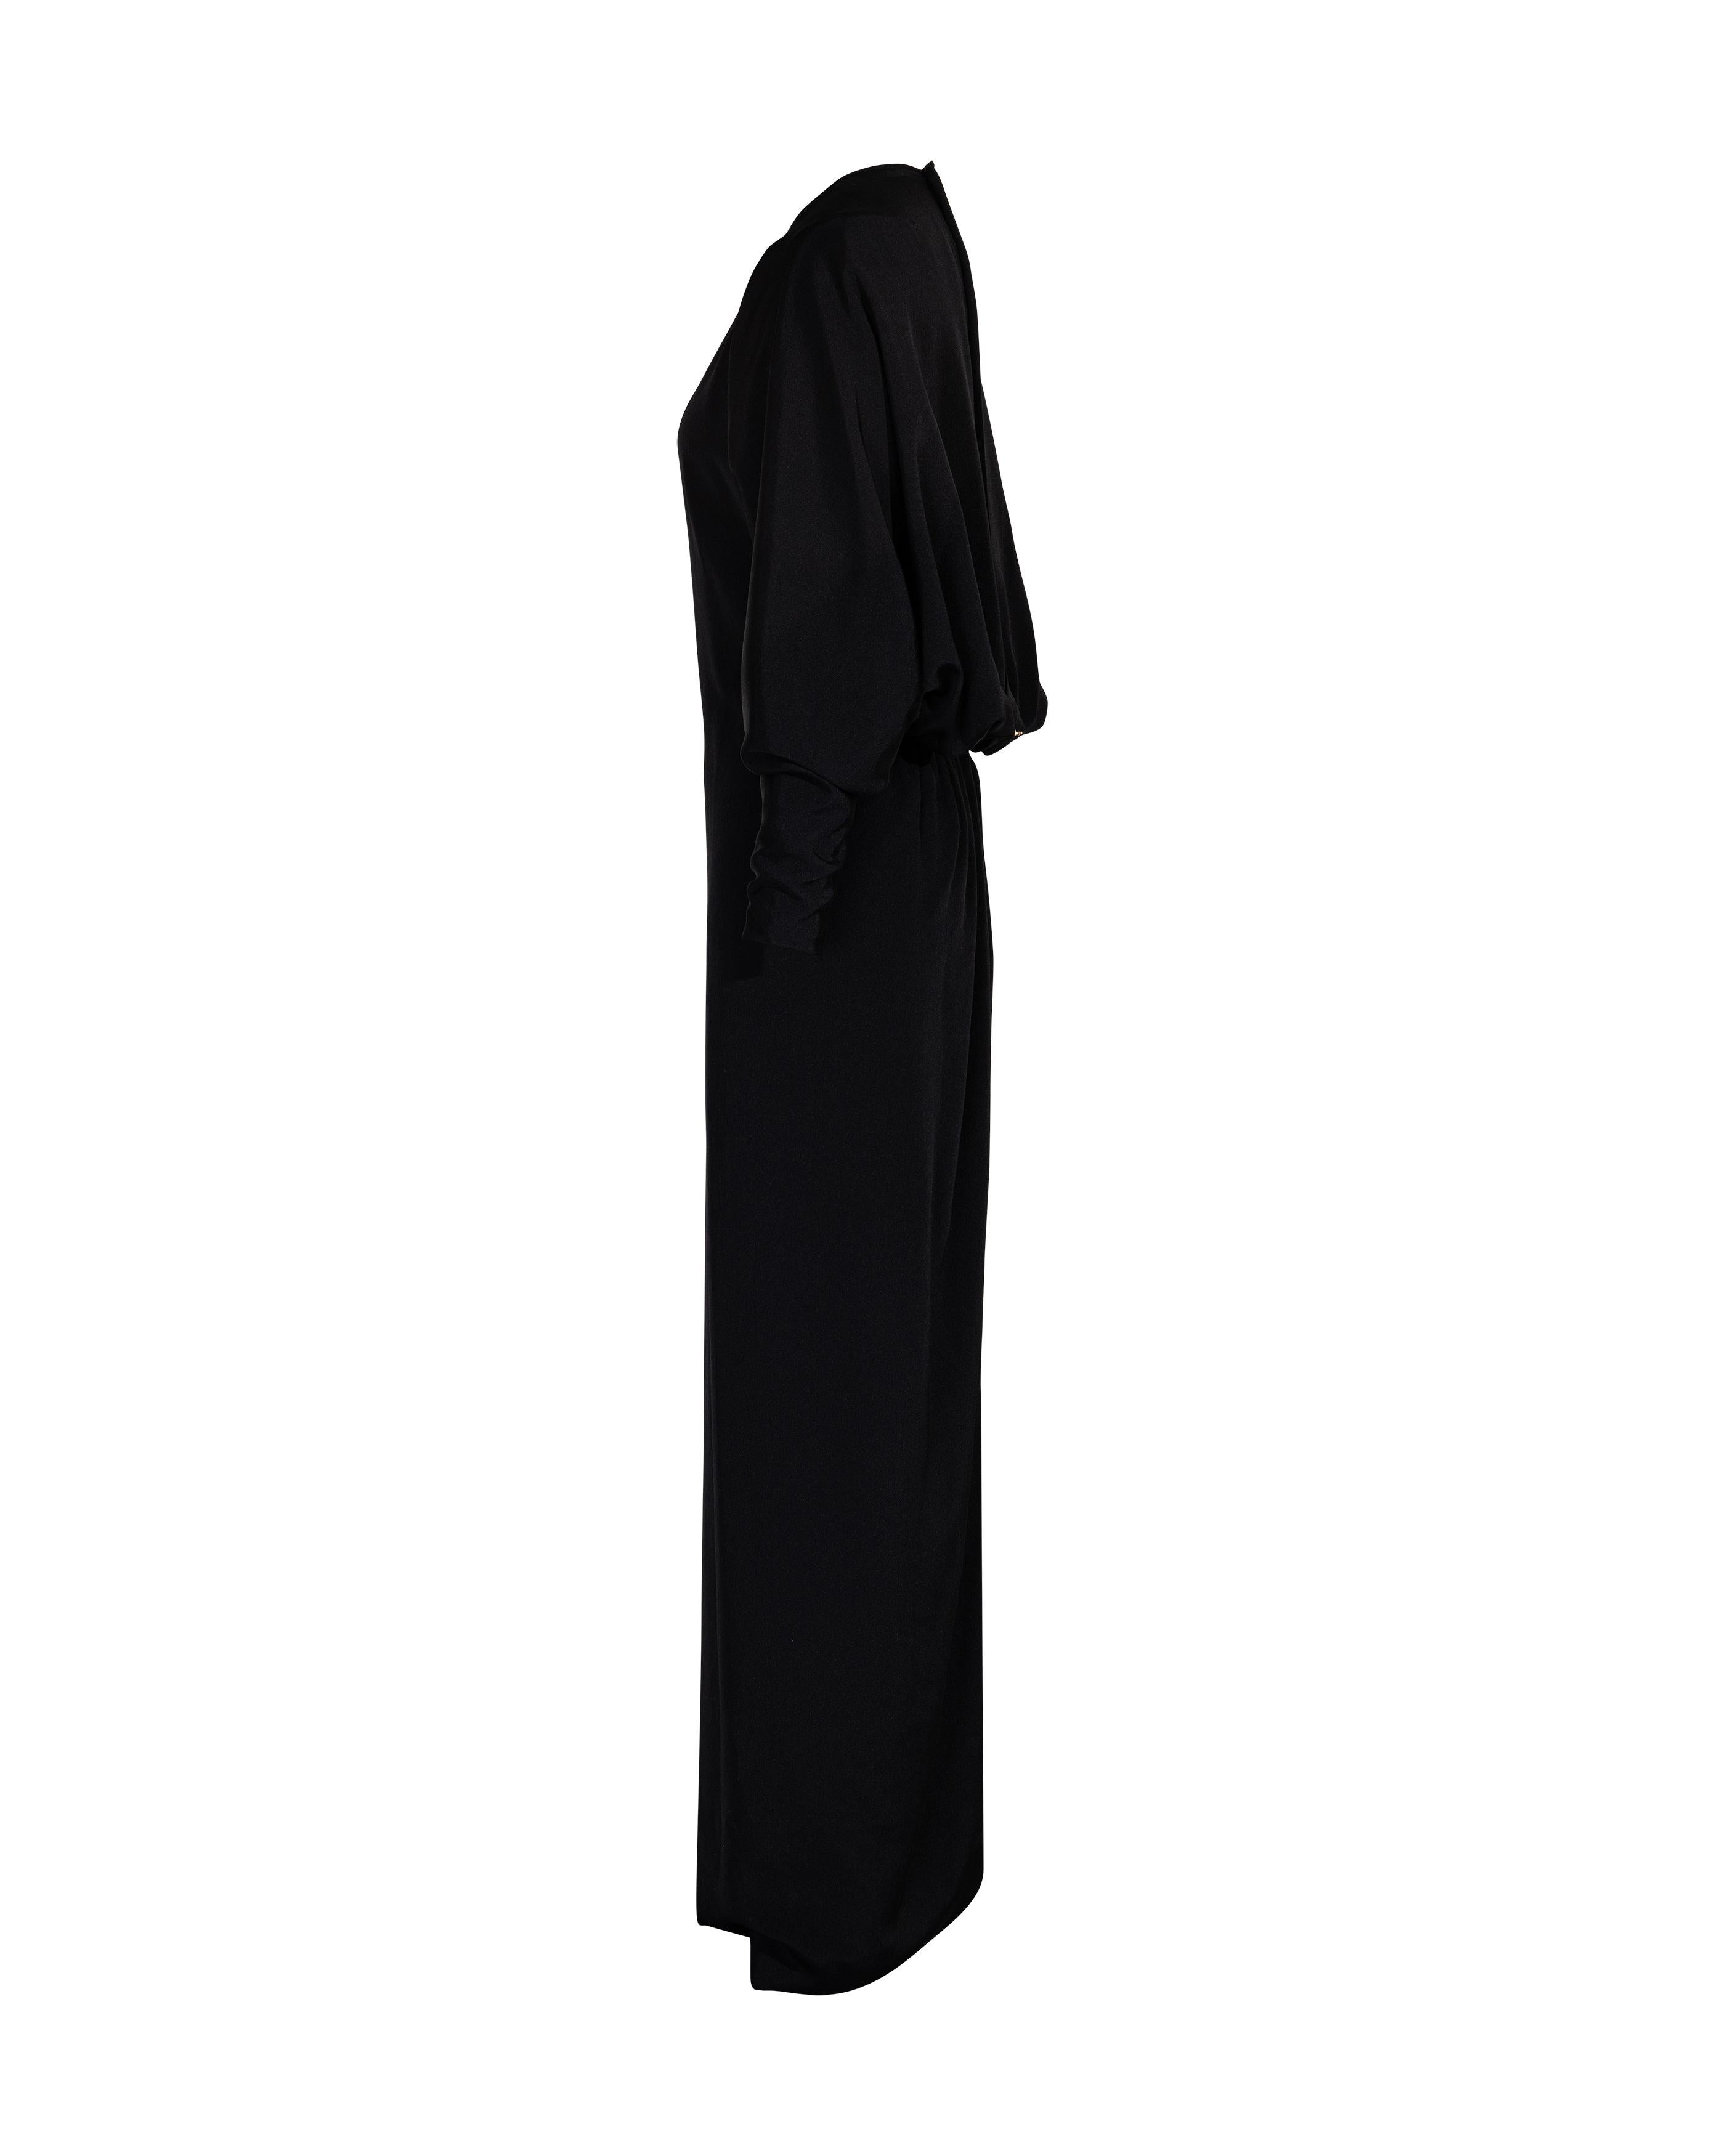 Women's 1960's James Galanos Bat-wing Black Gown with Button-Up Back